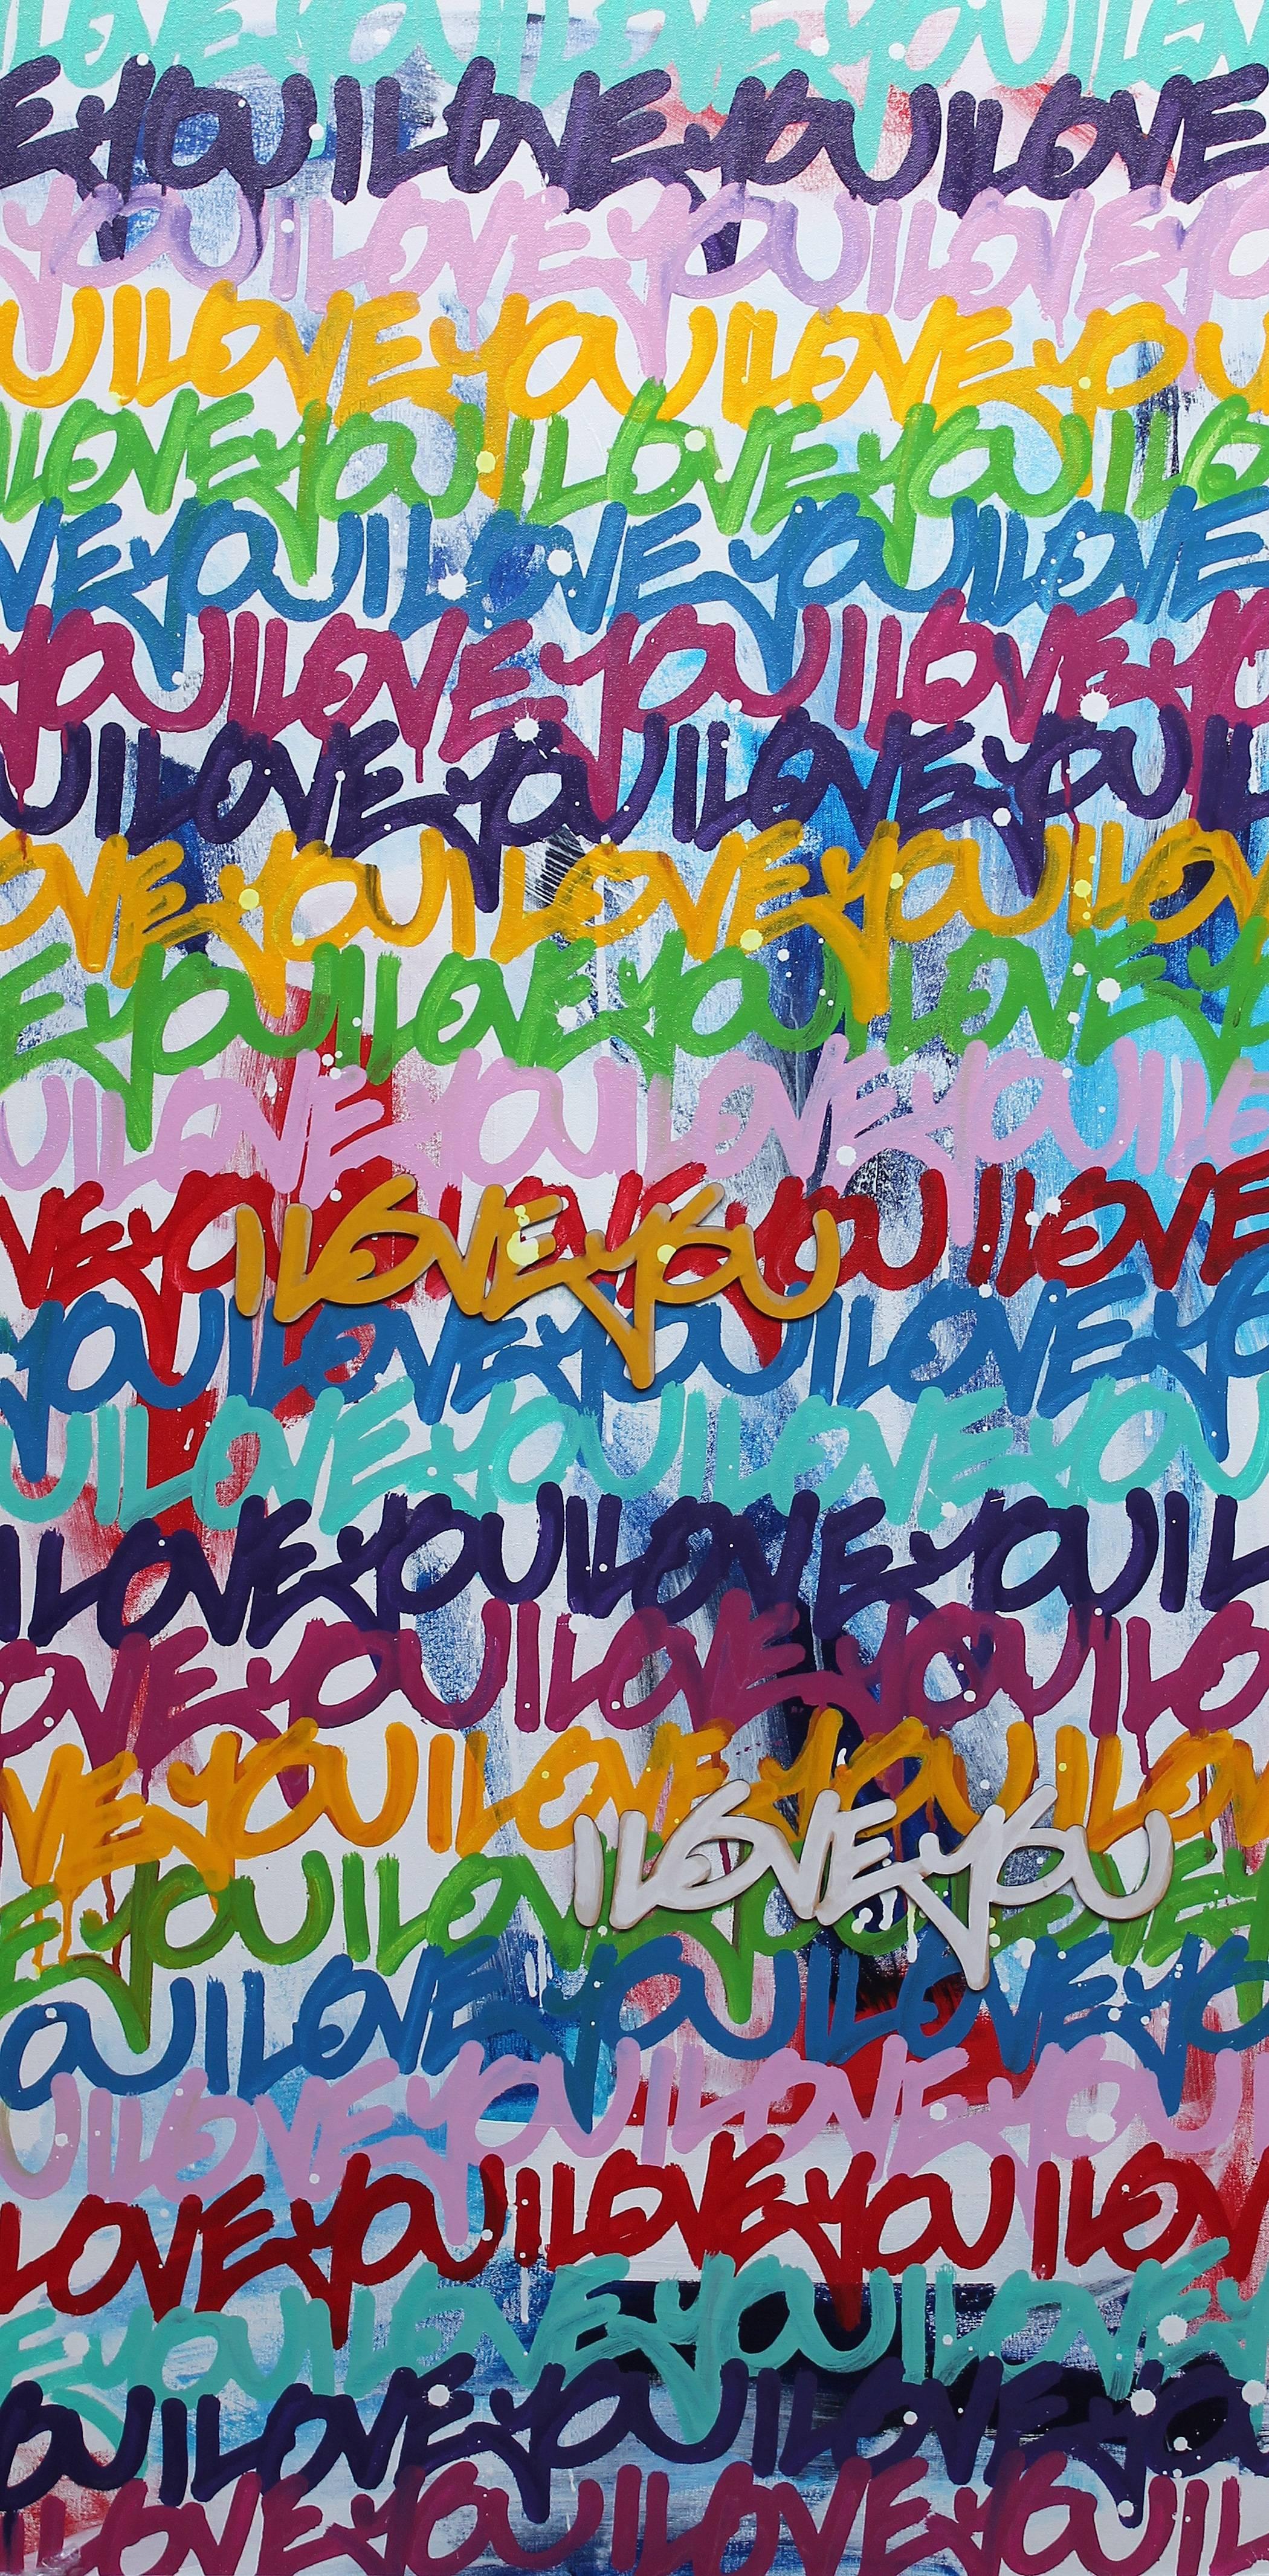 Amber Goldhammer Abstract Painting - "Poppin' Love" Original Mixed Media Street Art Painting